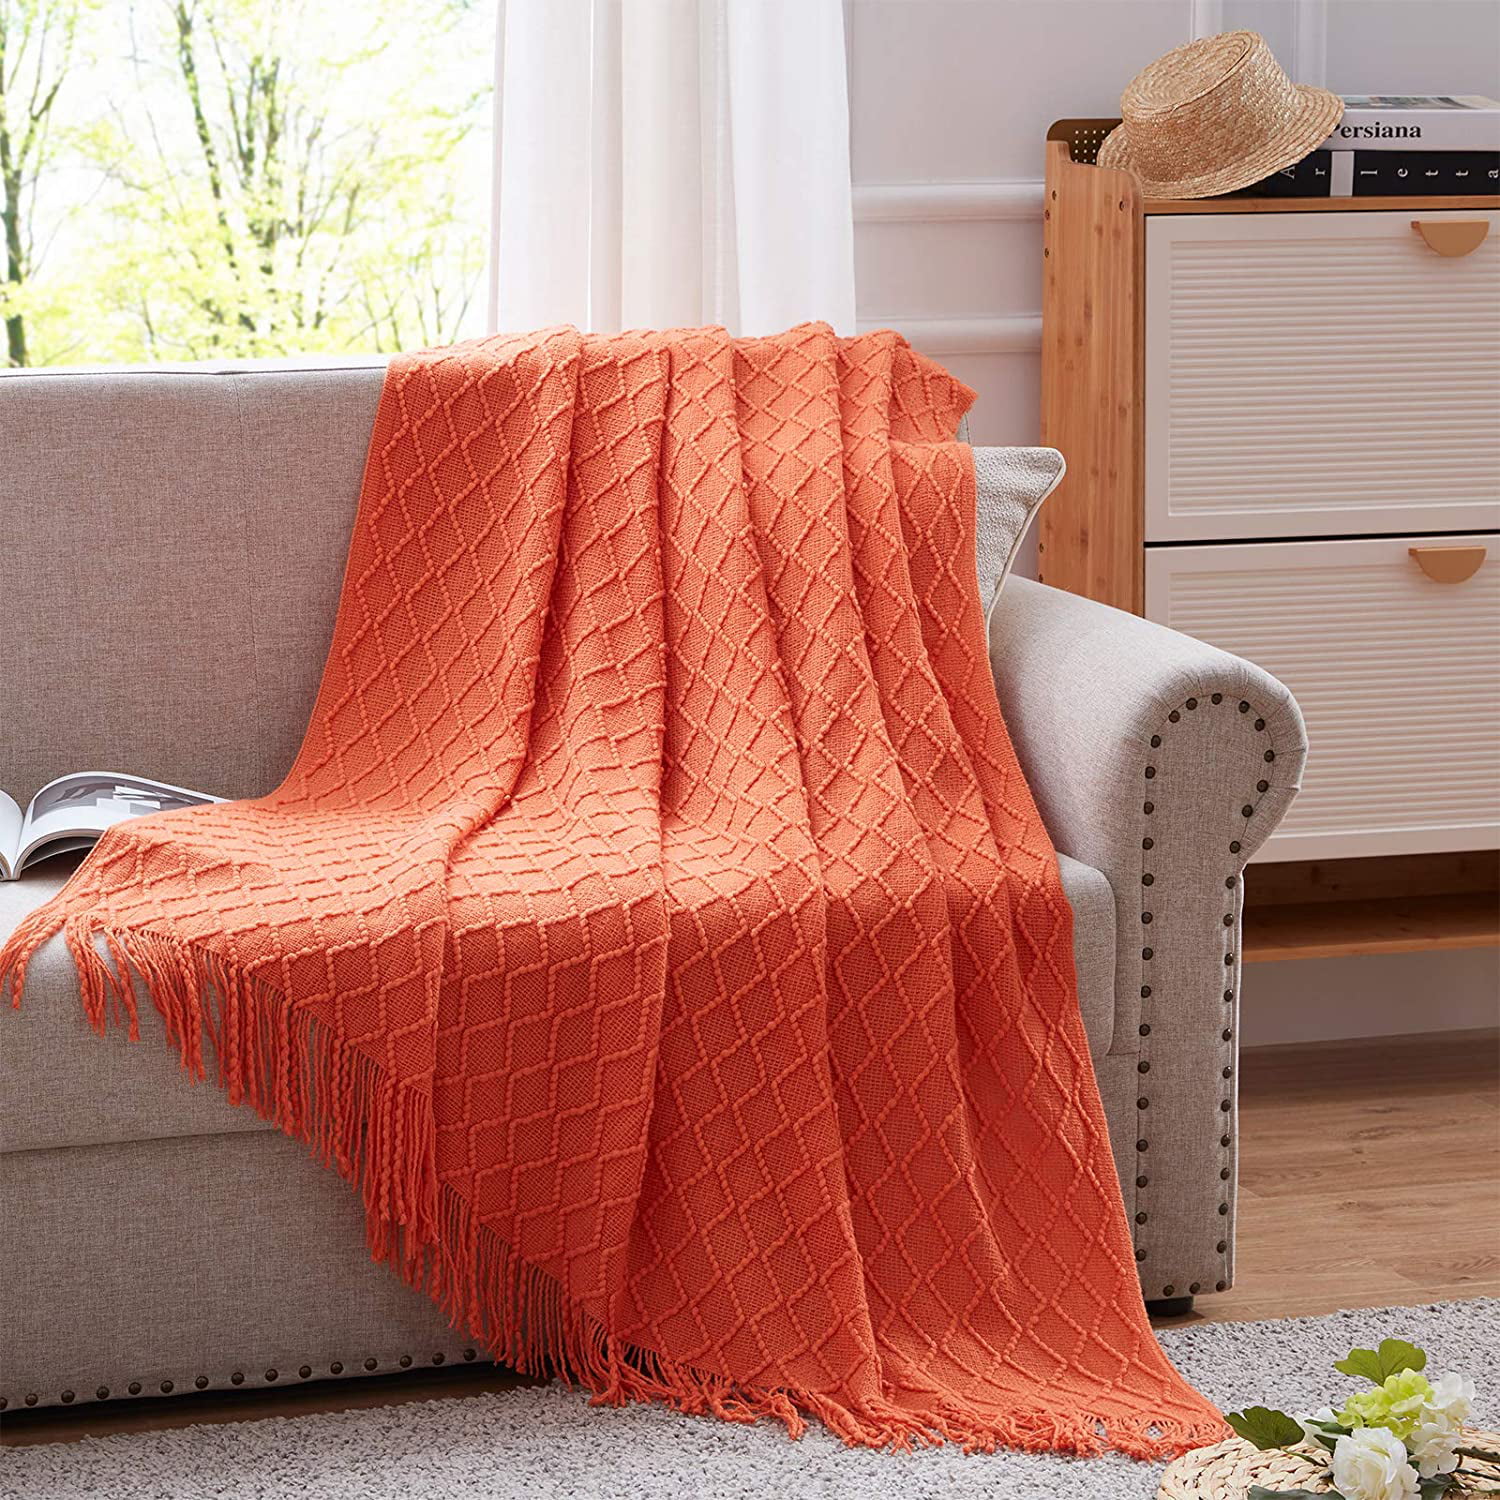 Woven Throw Blanket Orange Floral Medallion Super Soft Lightweight Blanket for Sofa Couch Decoration Throw 50 x 70 